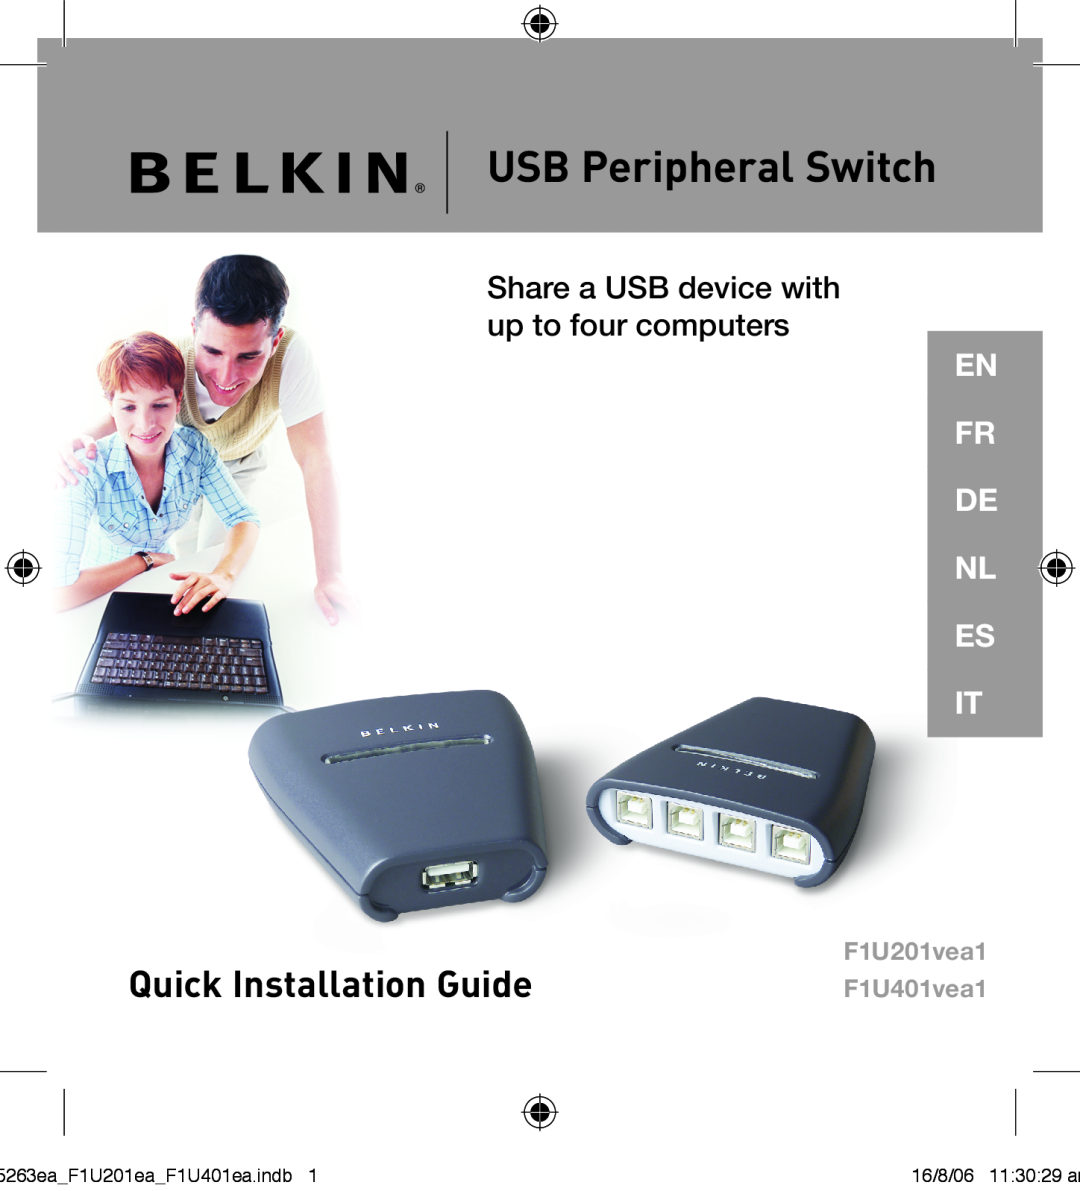 Belkin F1U201VEA1 manual USB Peripheral Switch, Quick Installation Guide, Share a USB device with up to four computers 